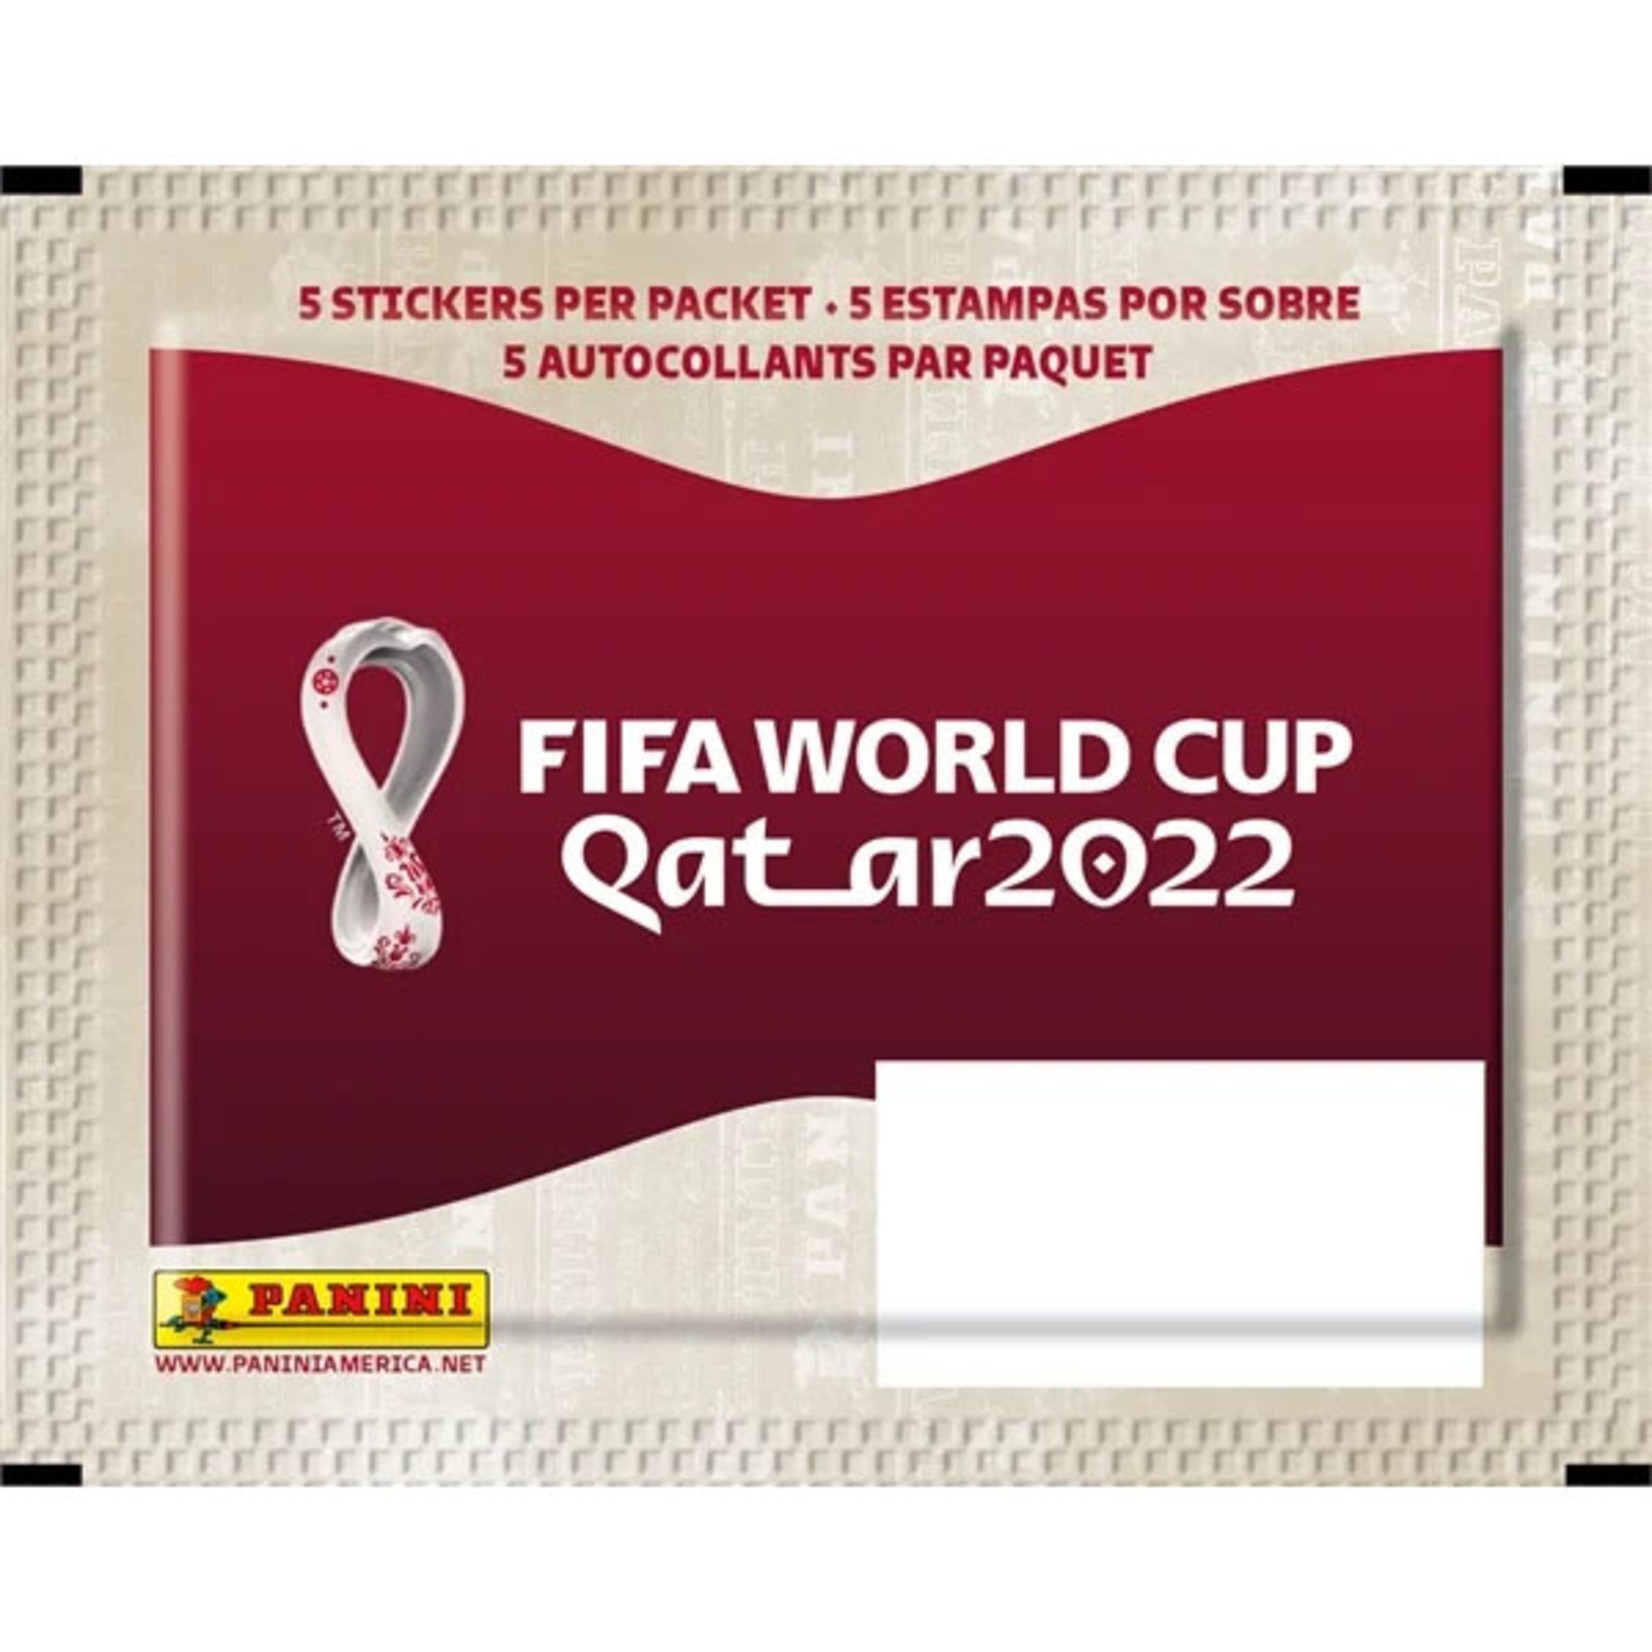 PANINI WORLD CUP 2022 STICKERS (PACK - 5 STICKERS)